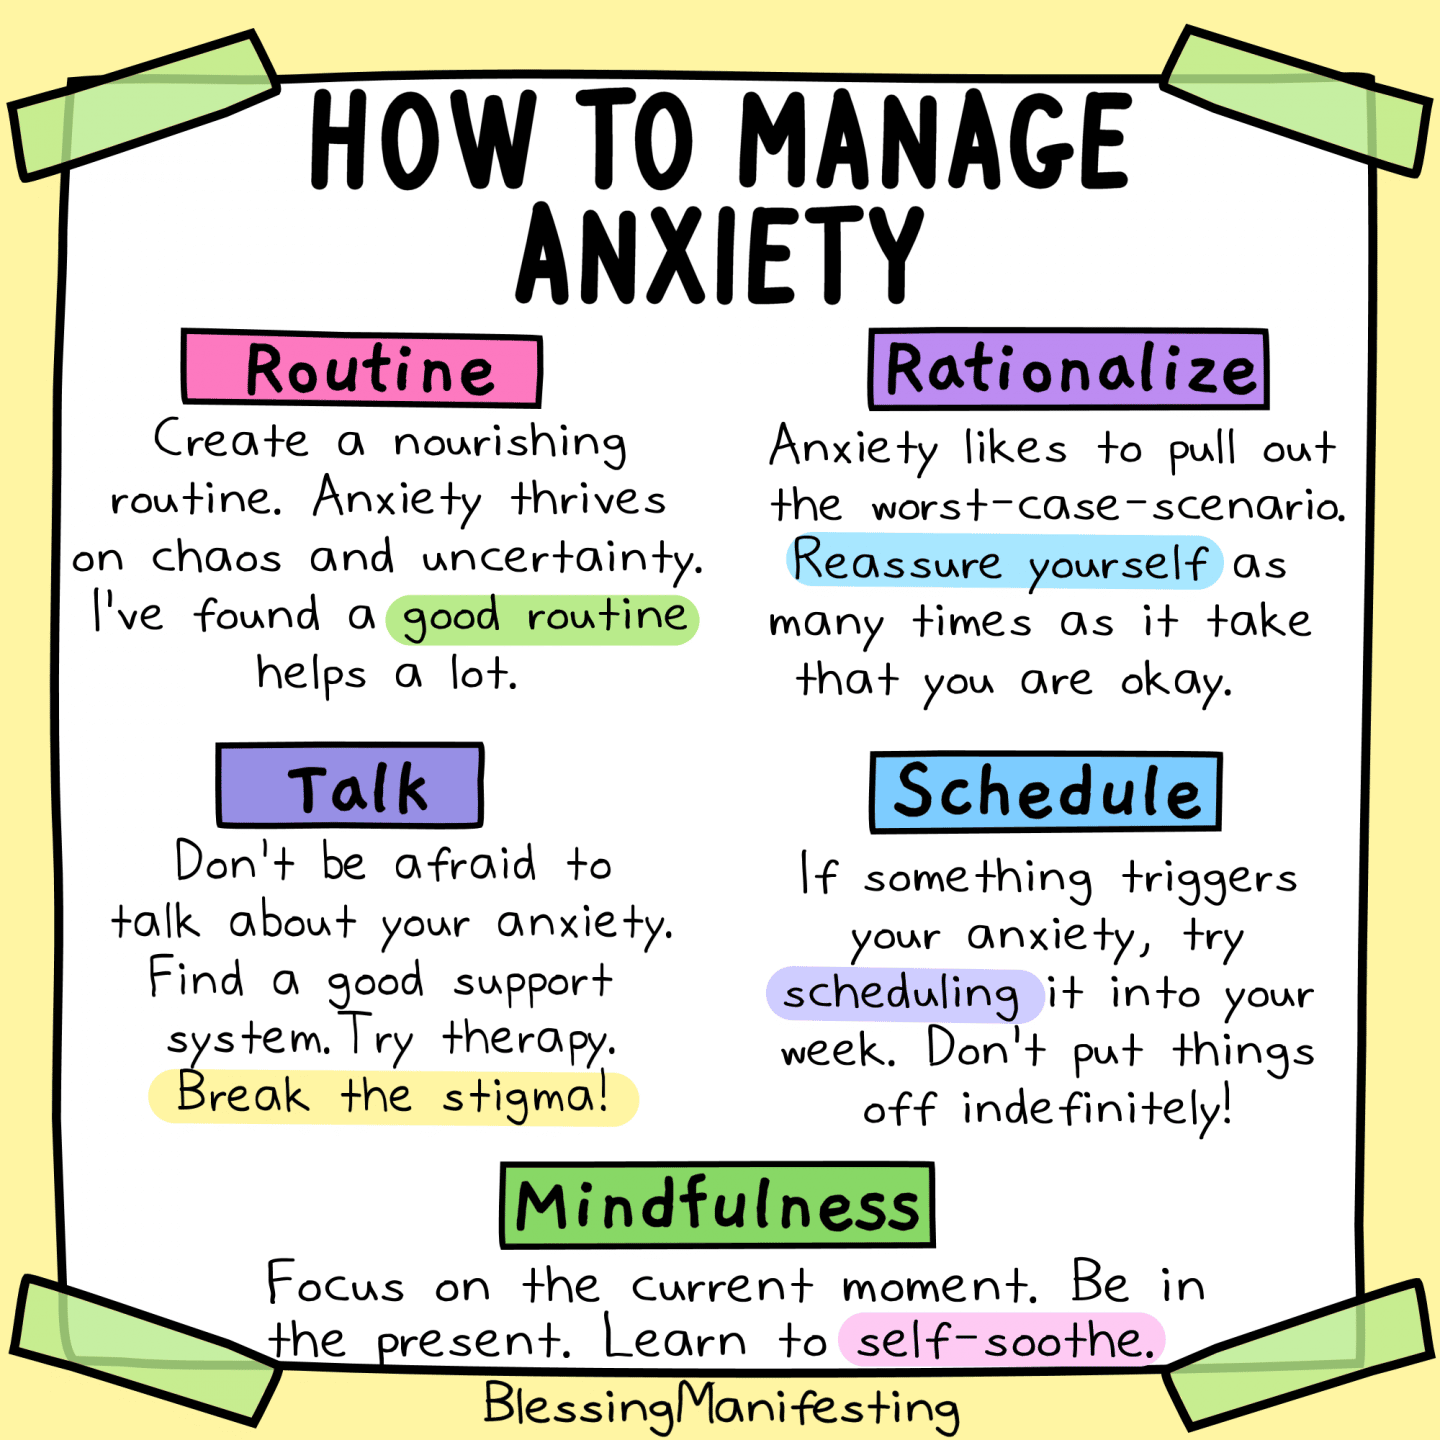 How to Manage Anxiety